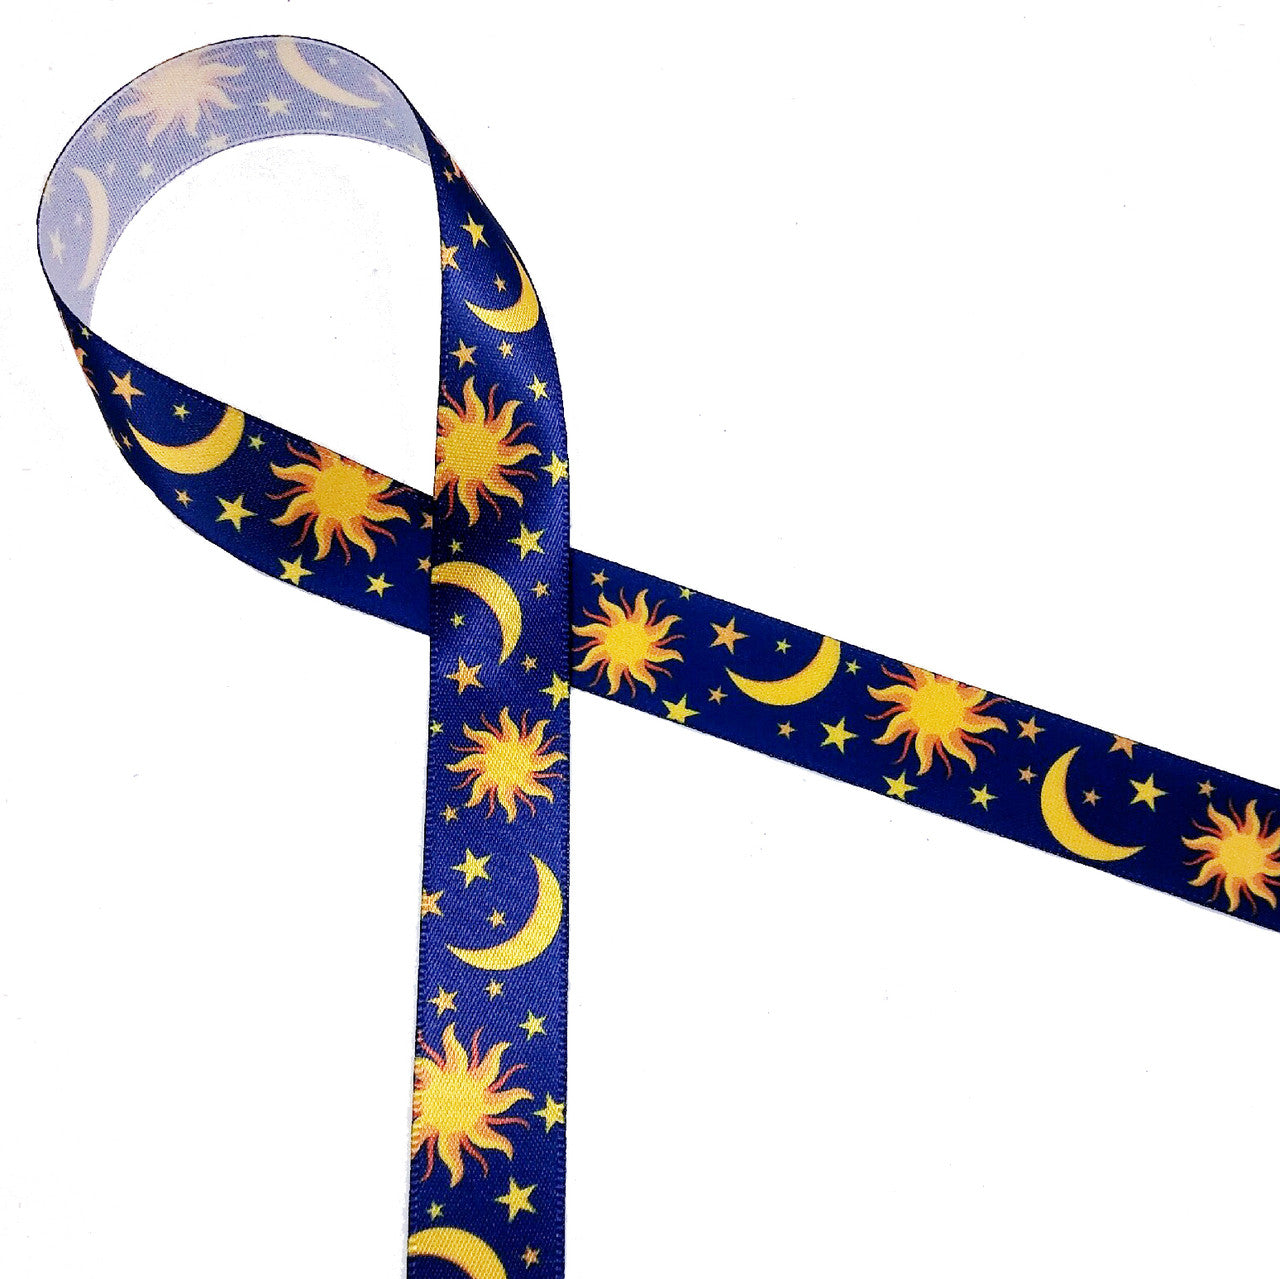 The Sun, Moon and Stars on a midnight blue background printed on 5/8" white single face satin ribbon is a beautiful ribbon for the most thoughtful of friends.